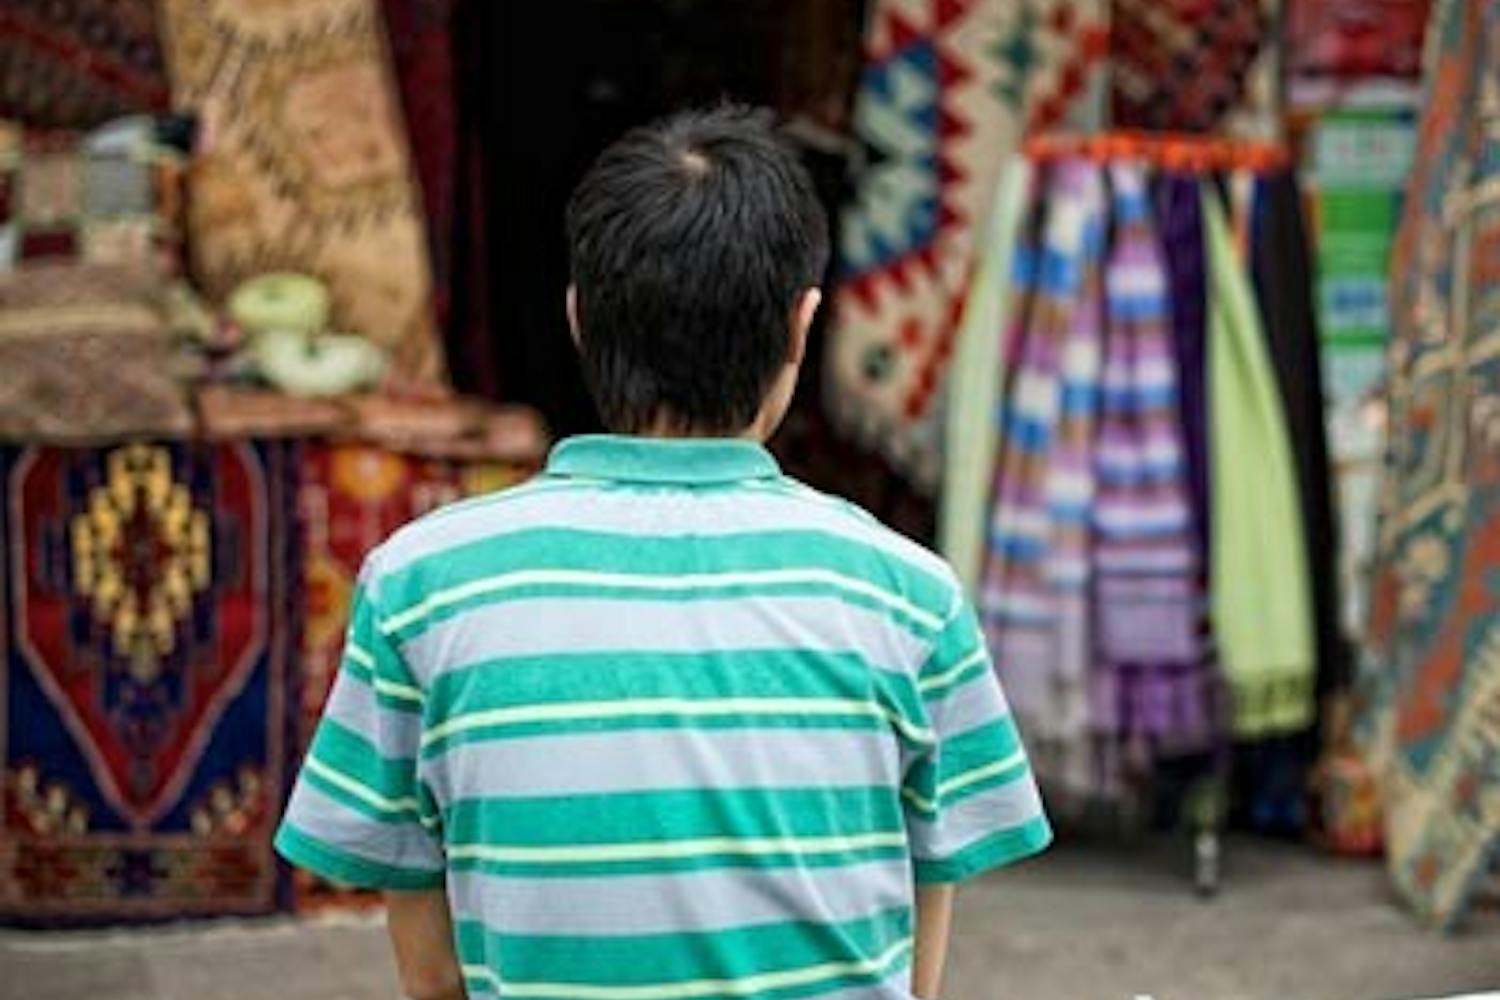 GLOBAL LOANS: A young boy waits for customers in front of his carpet stall at an outdoor bazaar in Selcuk, Turkey. Microloan organizations such as Kiva target similar individuals and small businesses to offer small-scale loans to. (Photo by Michael Arellano)